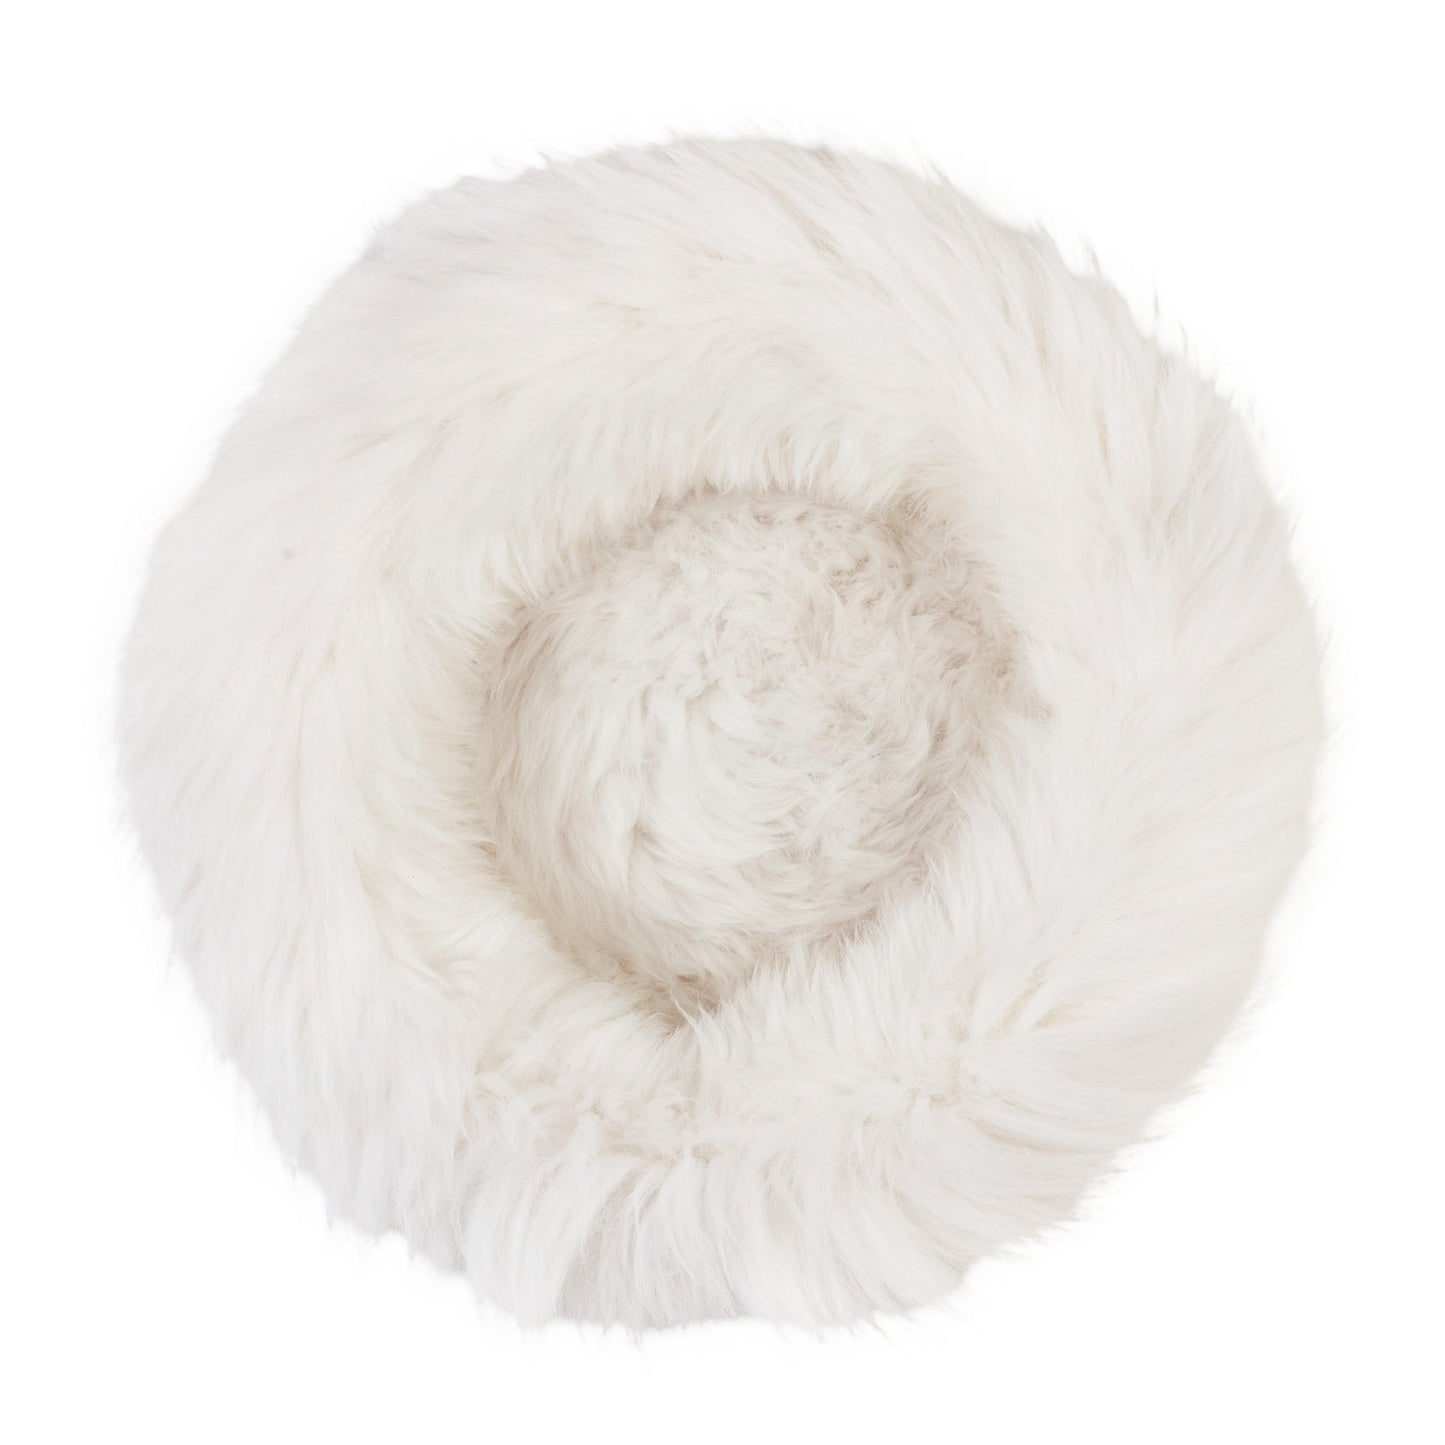 A Round Natural Sheepskin Pet Bed made from natural sheepskin on a white background by Mellow Pet Store.